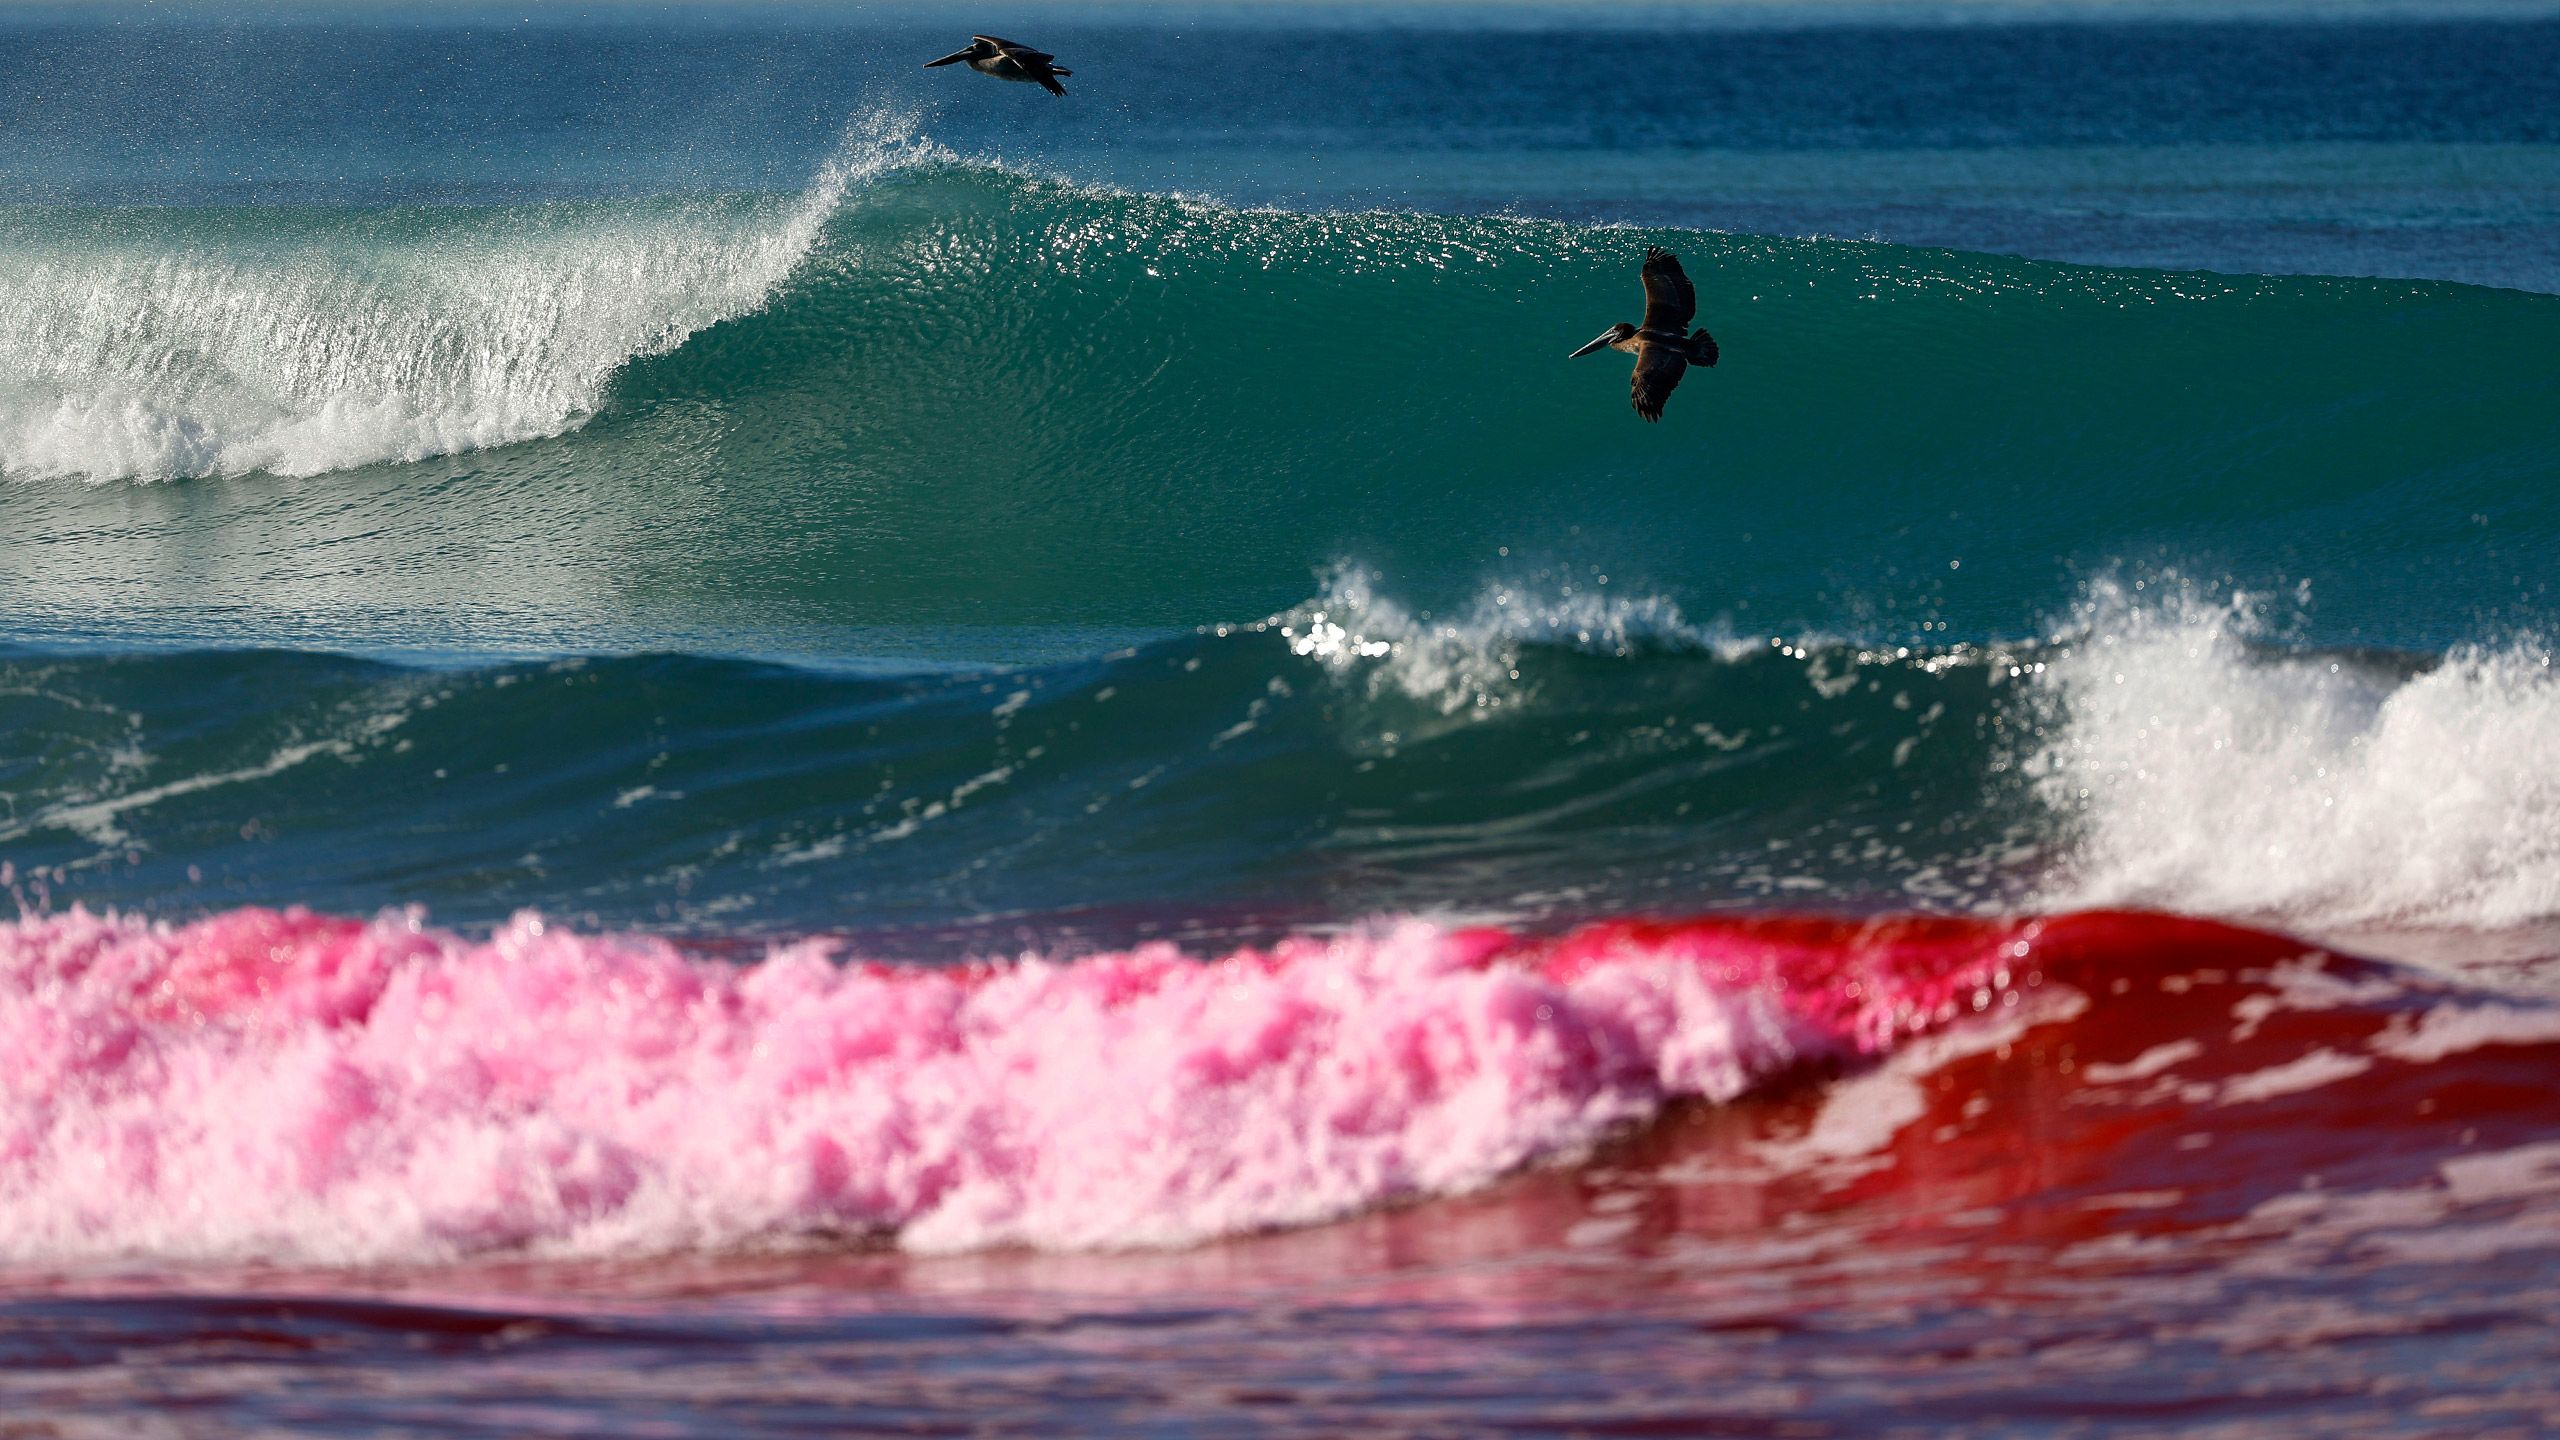 Brown pelicans fly by pink waves in the Pacific Ocean as researchers release safe dye to study water outflows.